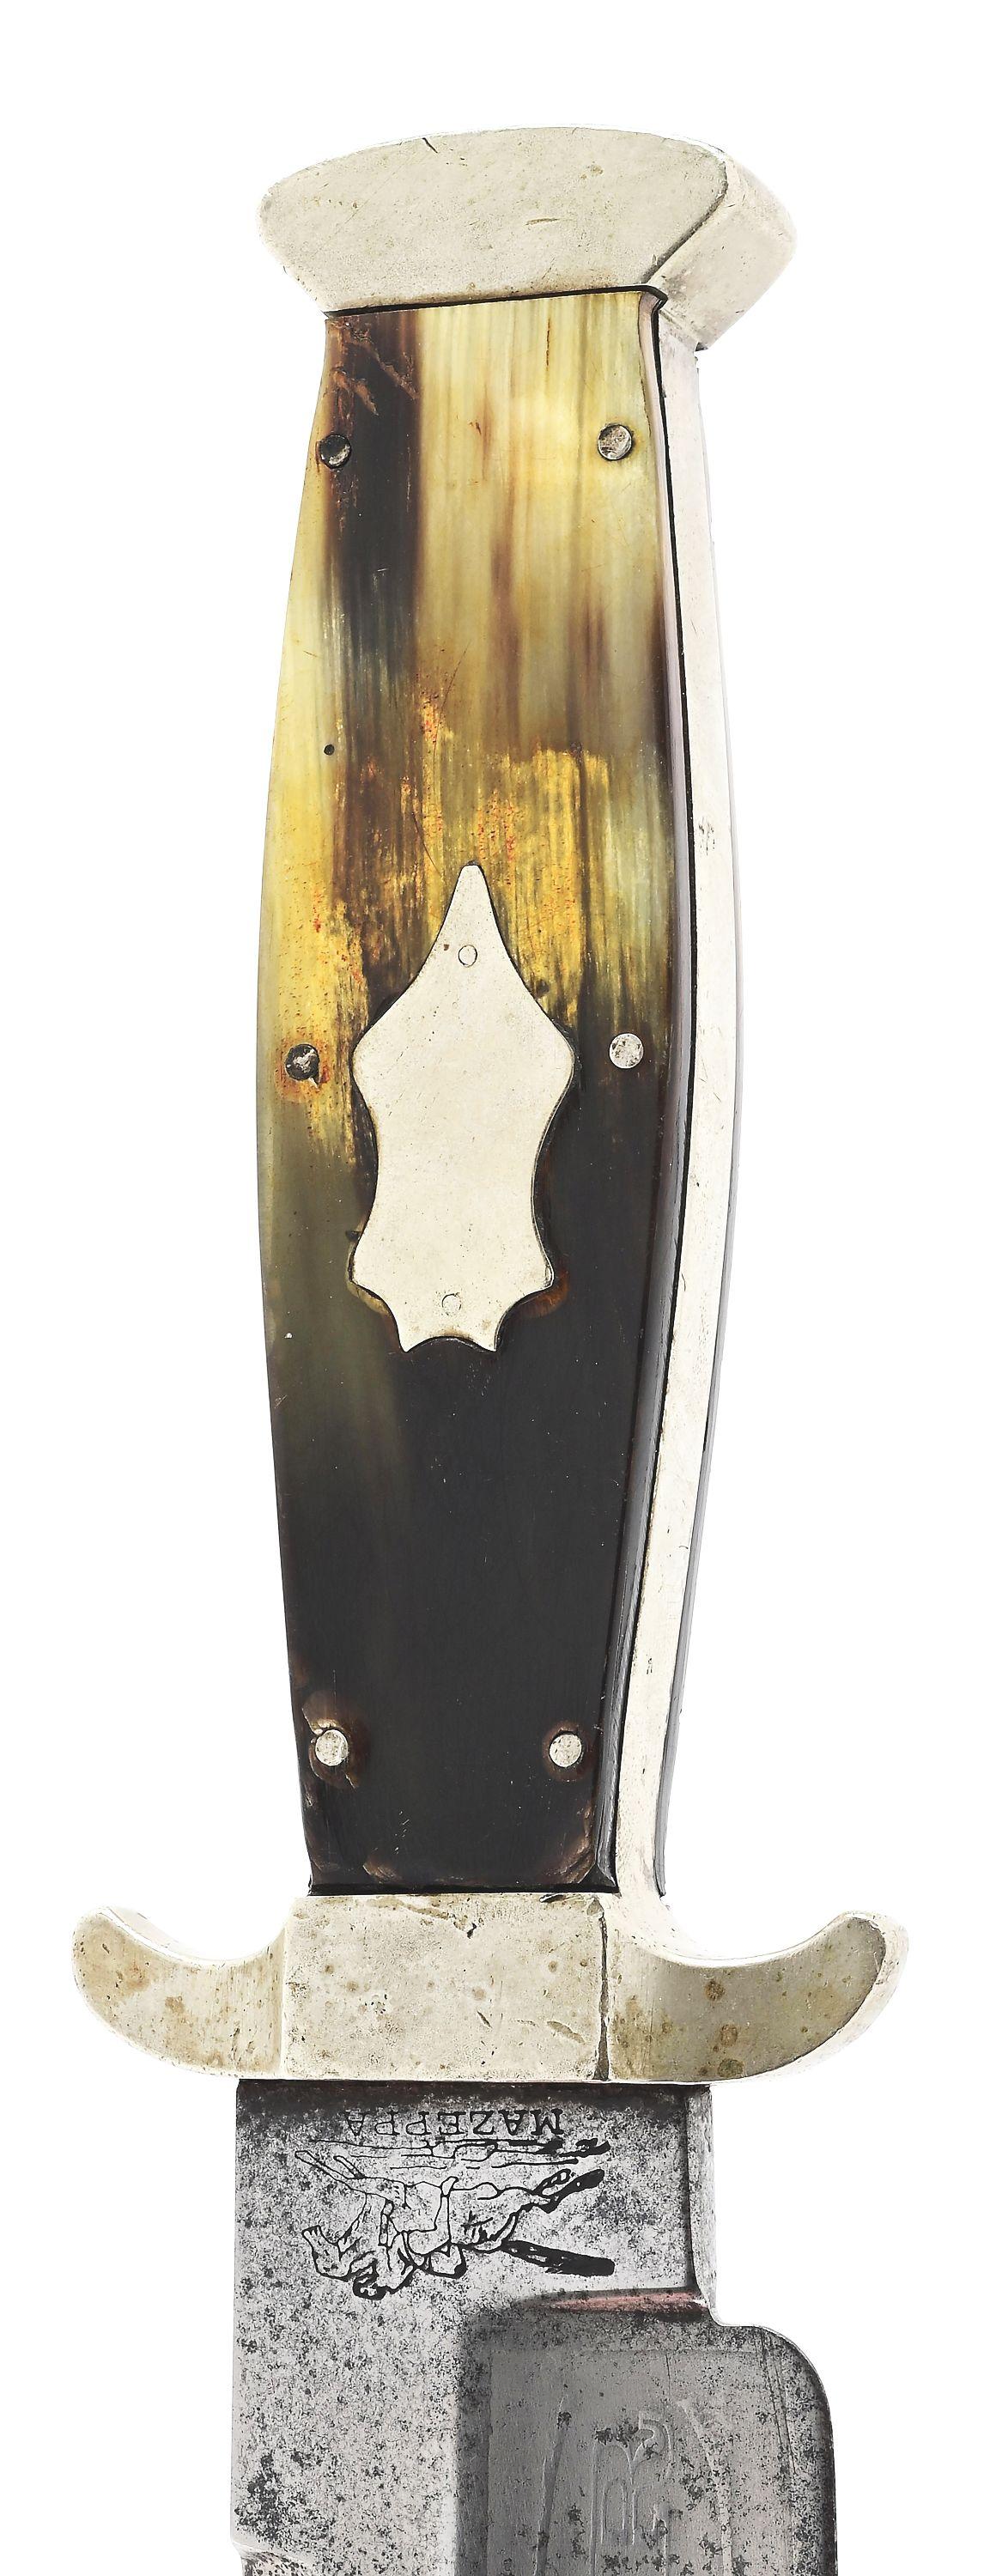 GOLD MINERS PROTECTOR BOWIE KNIFE BY SAMUEL HANCOCK.